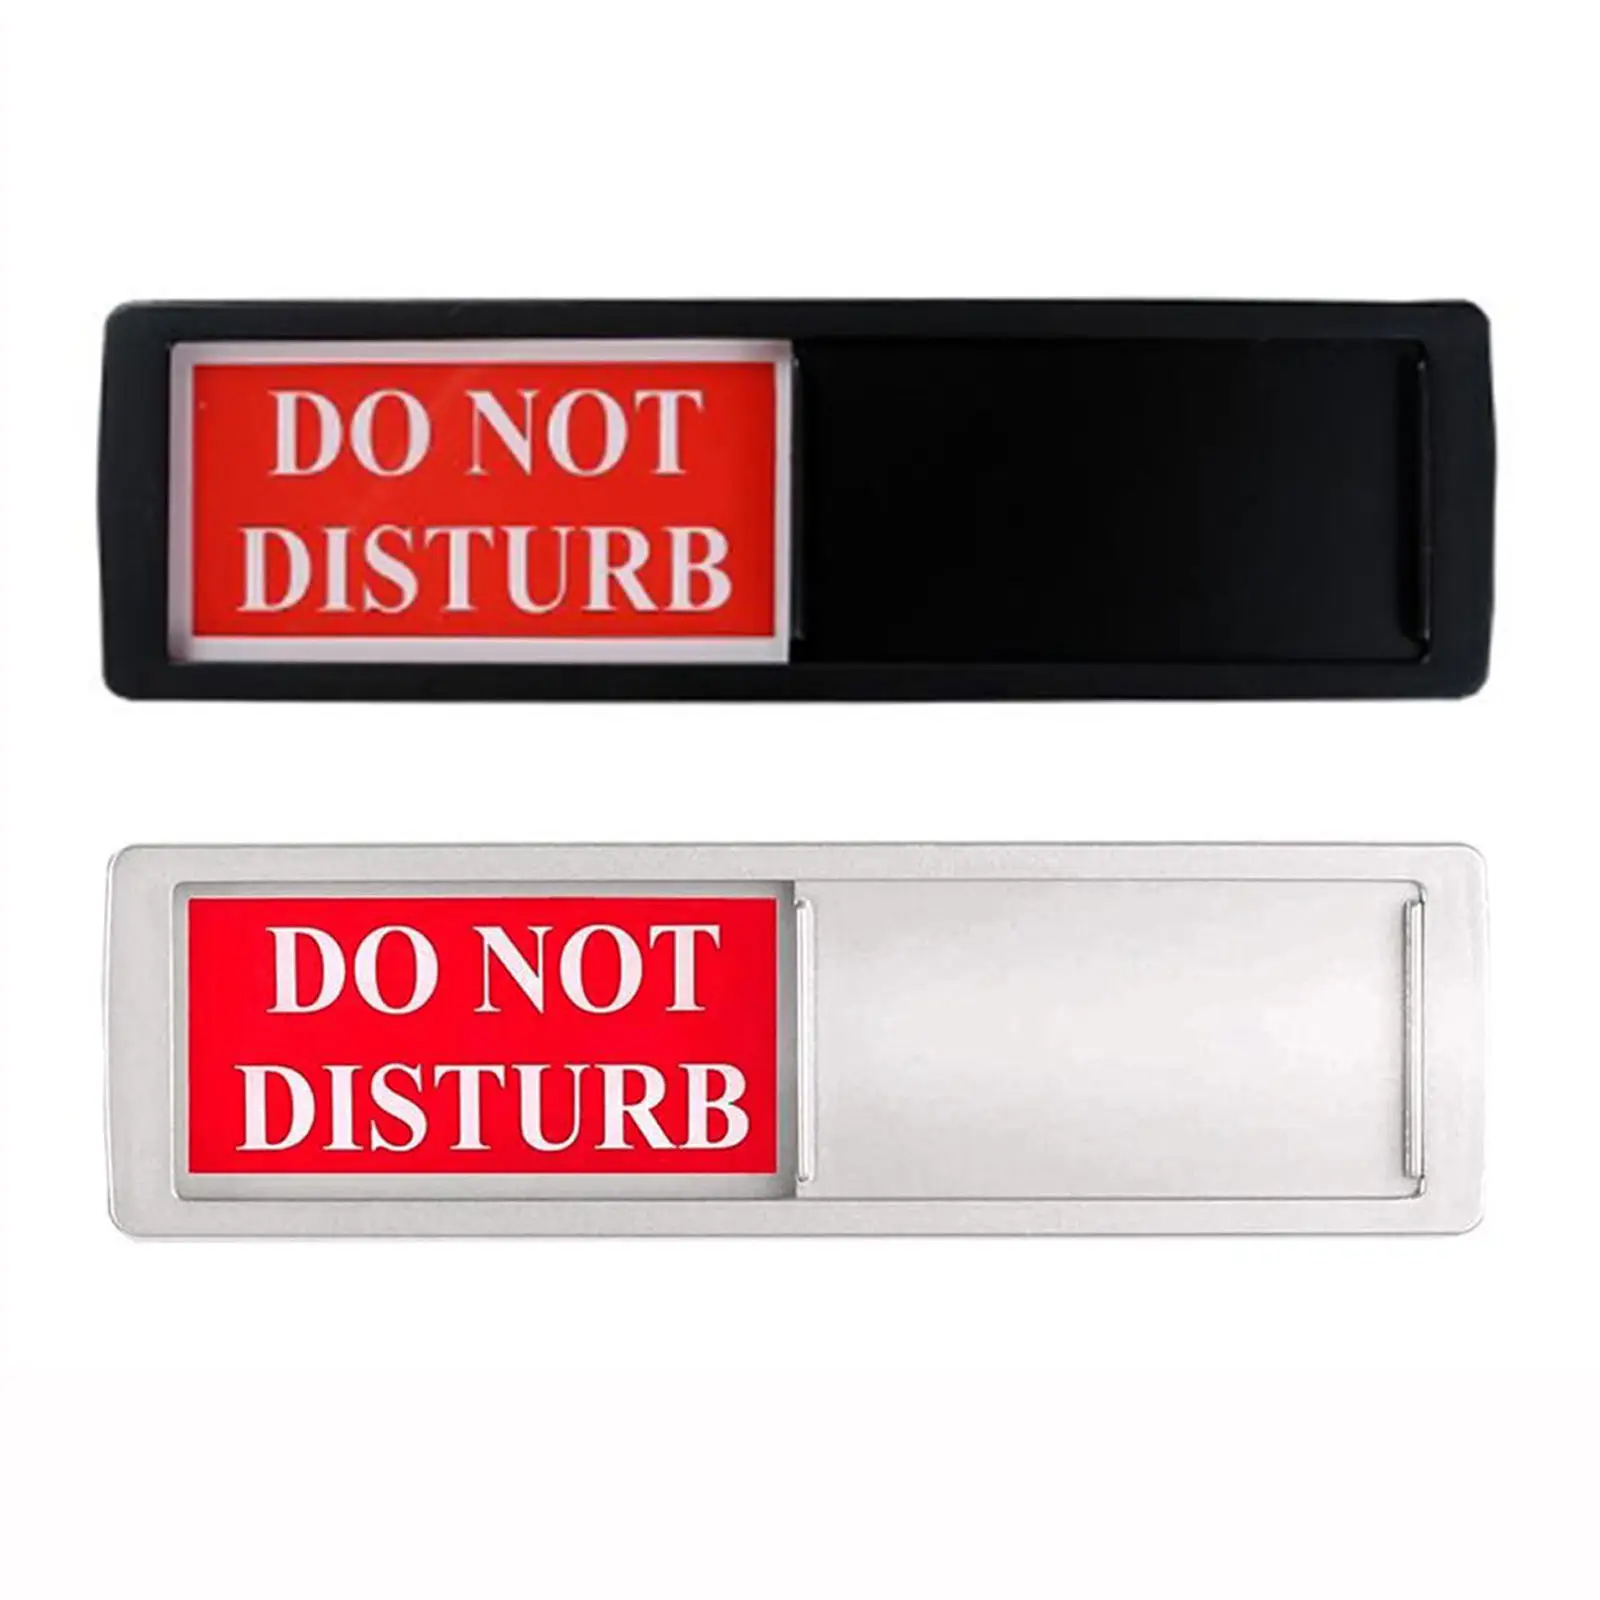 CAFE PUB OFFICE SELF ADHESIVE  TELEPHONE / DOOR SIGNS FOR HOTEL RESTAURANT 